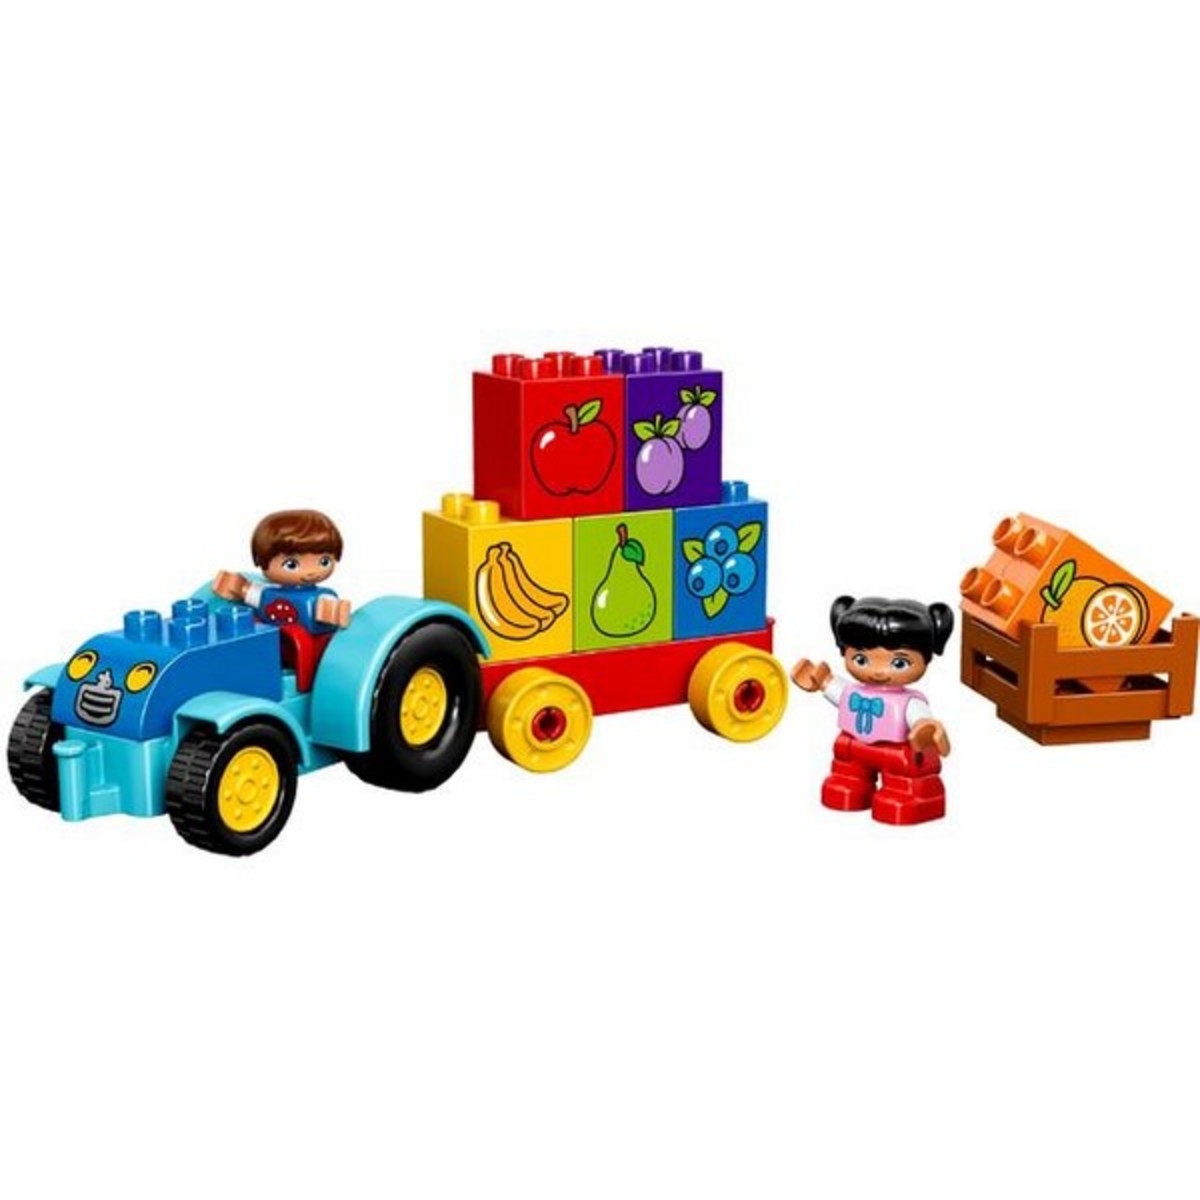 Lego My First Tractor 10615 Online at Best Price